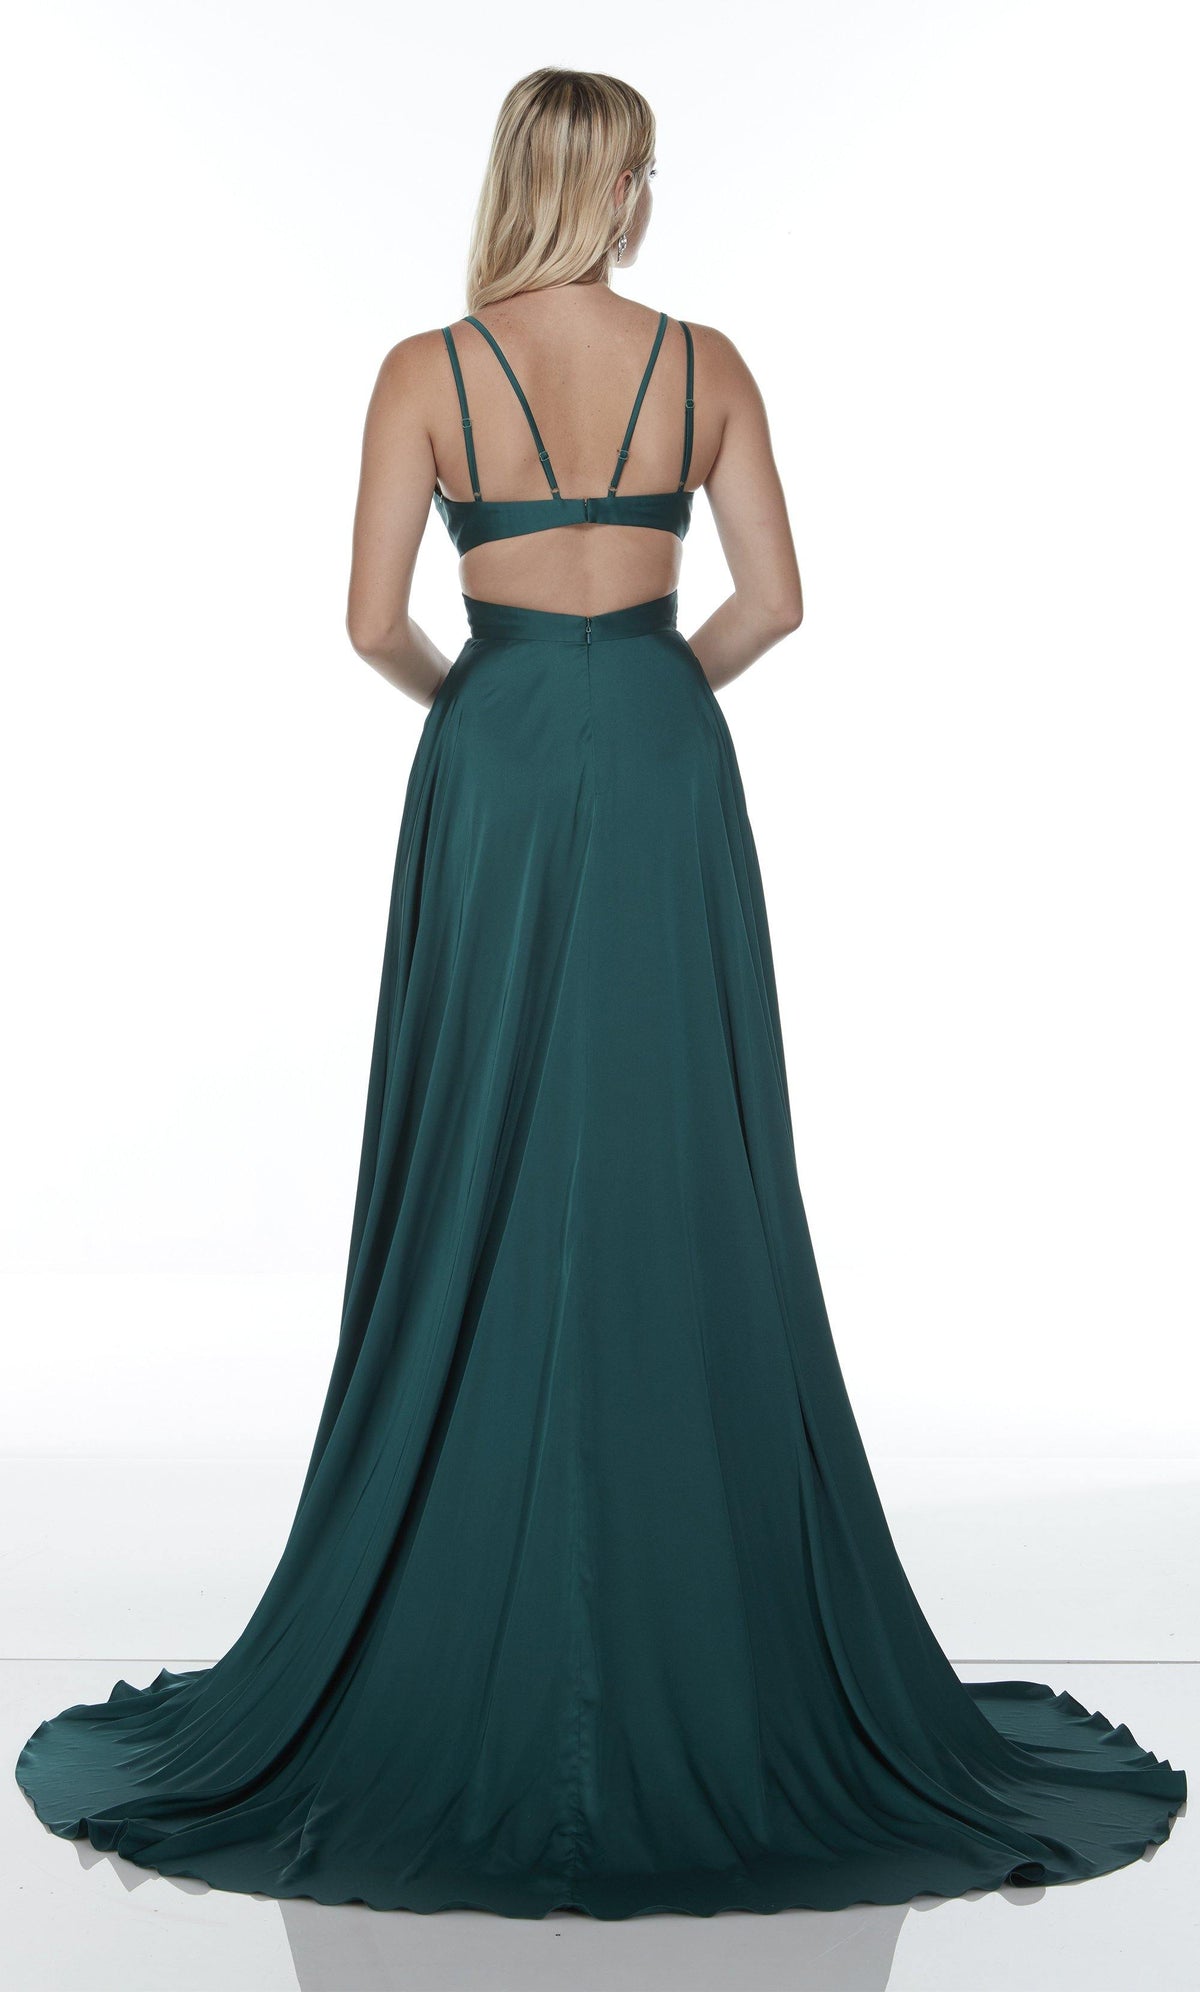 Green satin prom dress with a strappy open back and a train